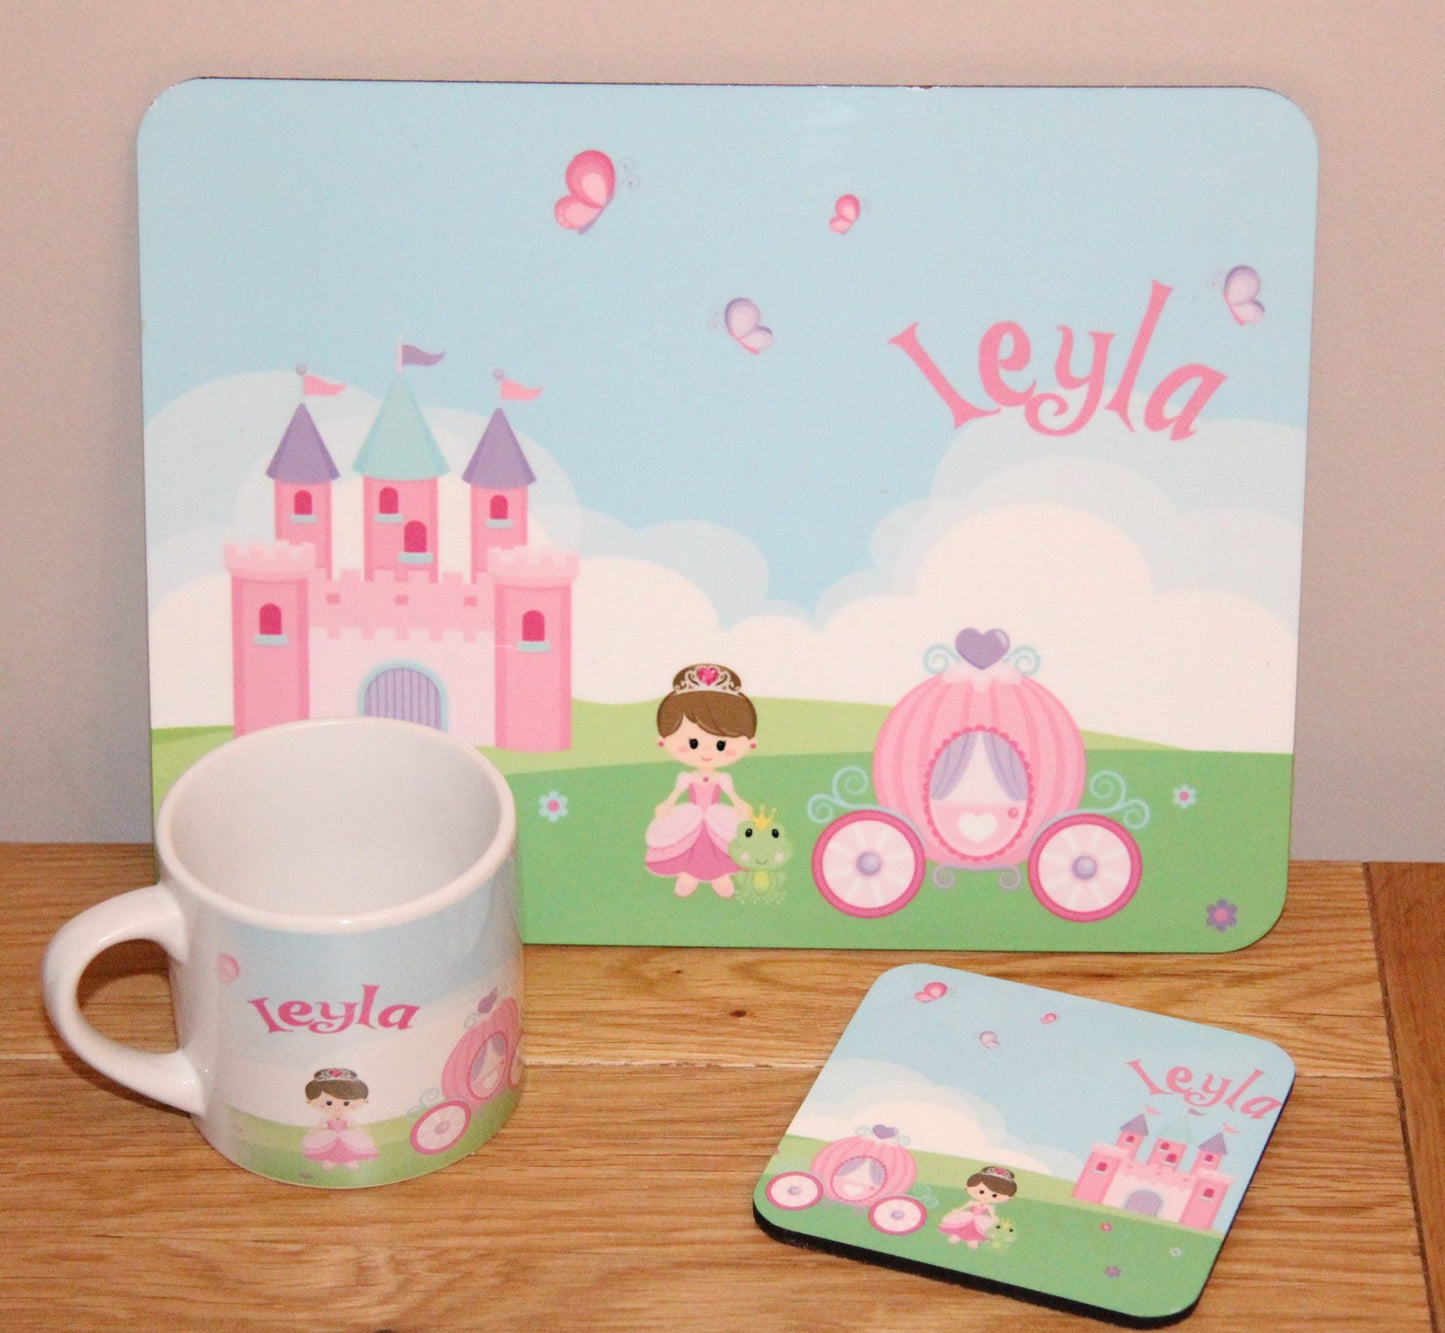 Personalised Children's Placemat Sets (Other designs available)